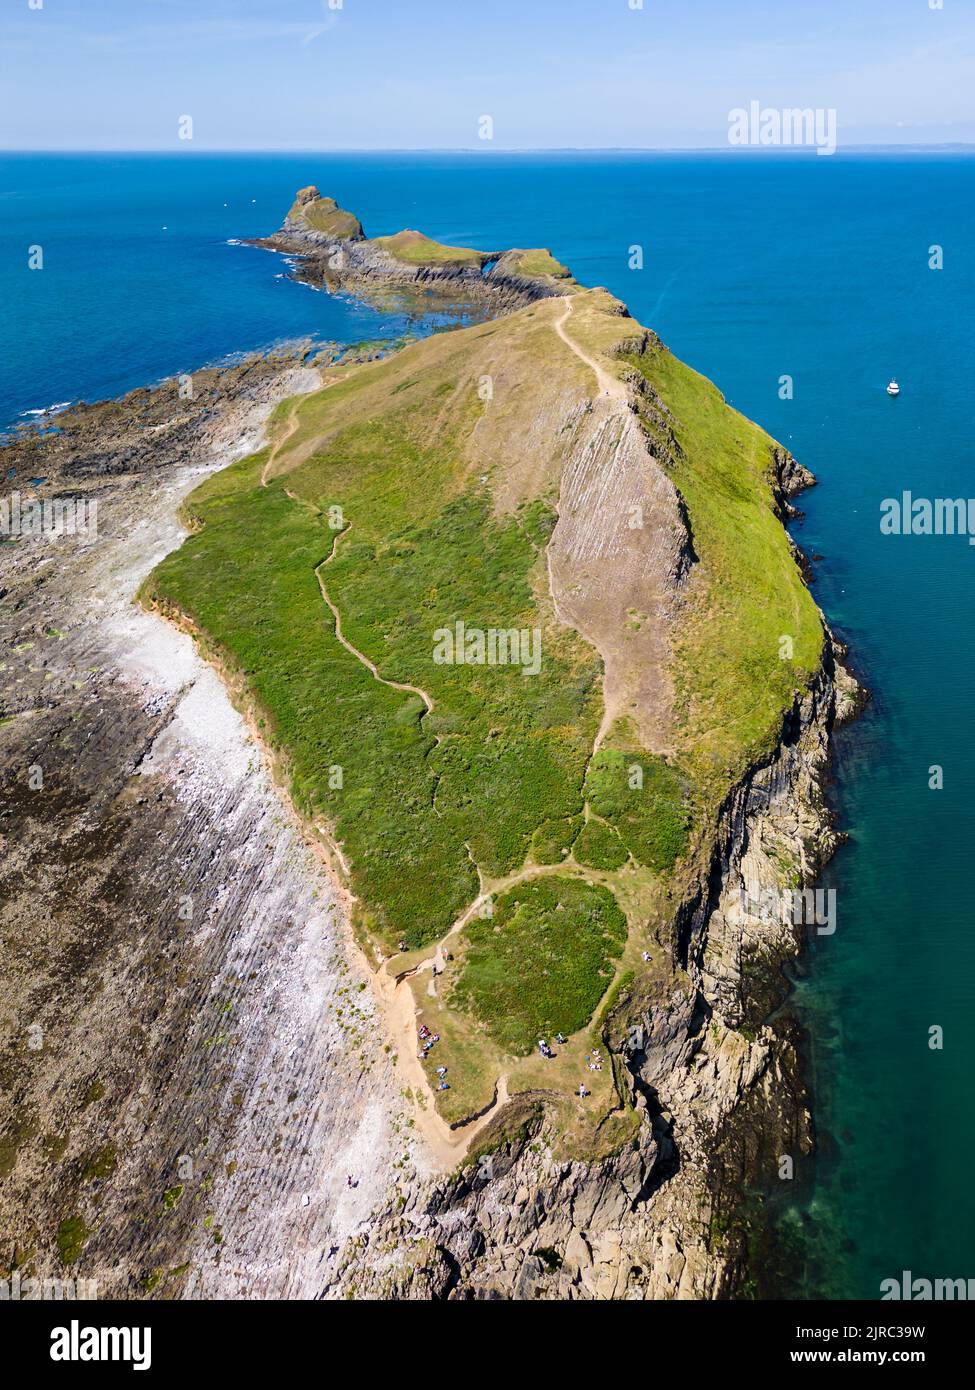 Aerial view of Worm's Head on the coast of Wales at low tide (Rhossili) Stock Photo